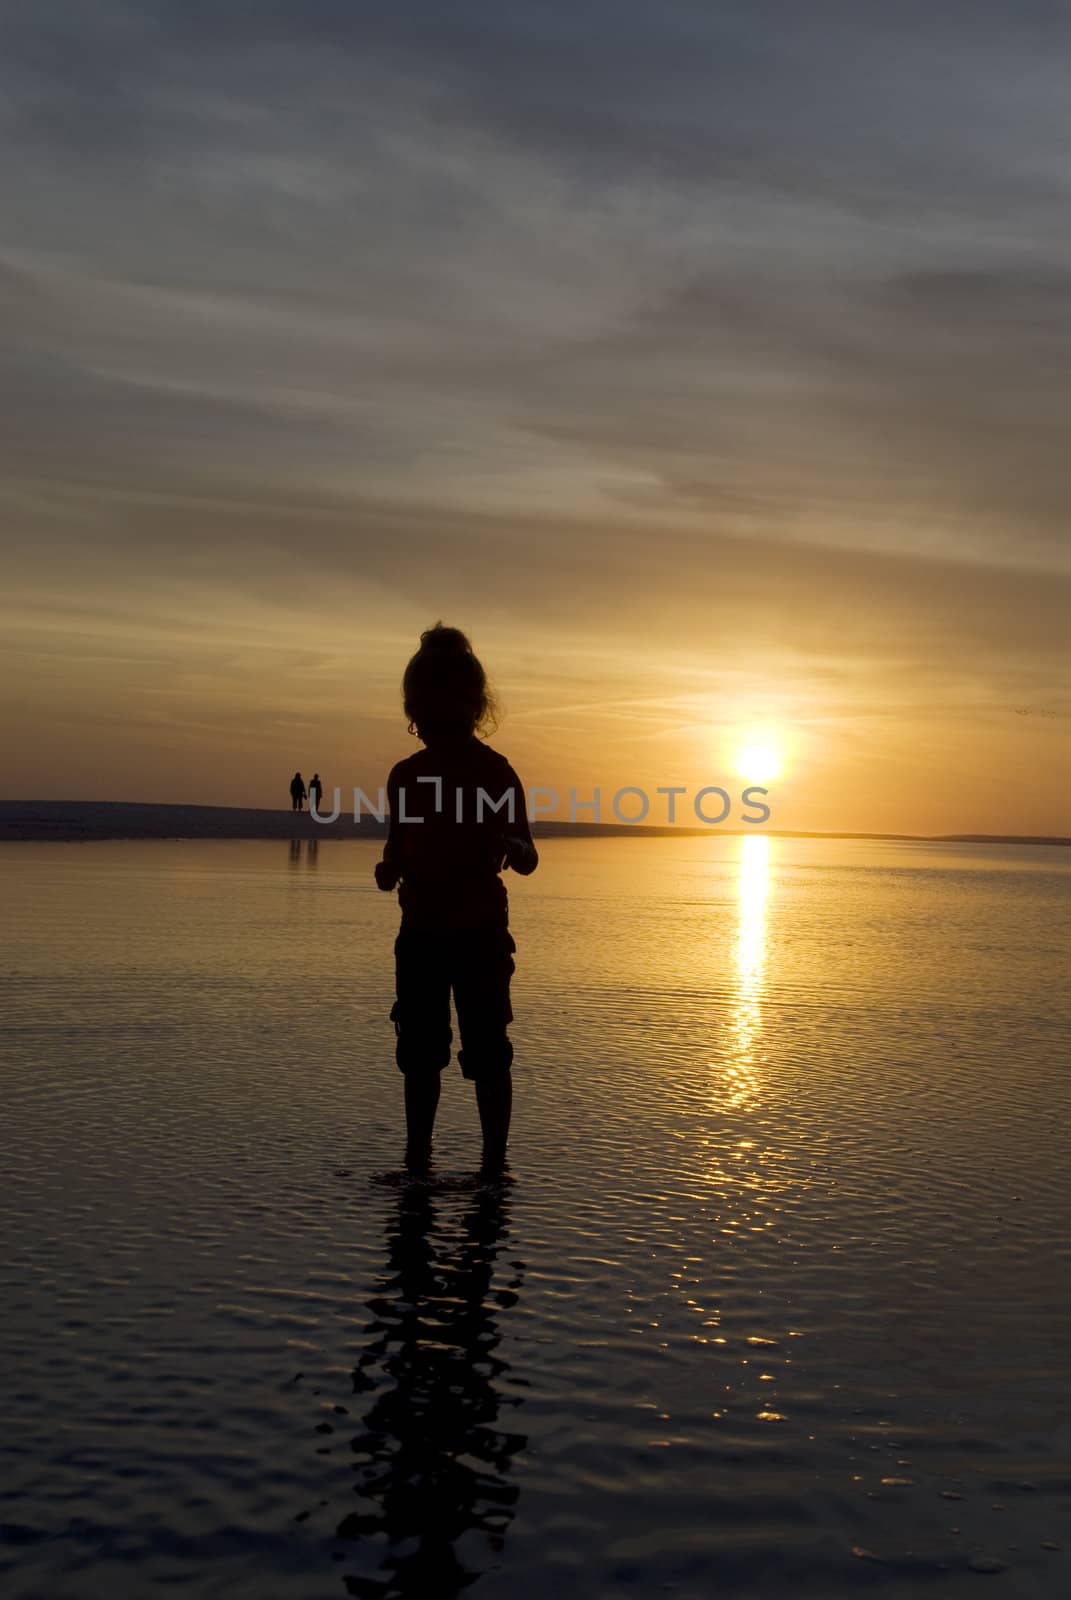 A young girl staring curiously at the ripples in a wading pool as the sun sets beautifully in the background